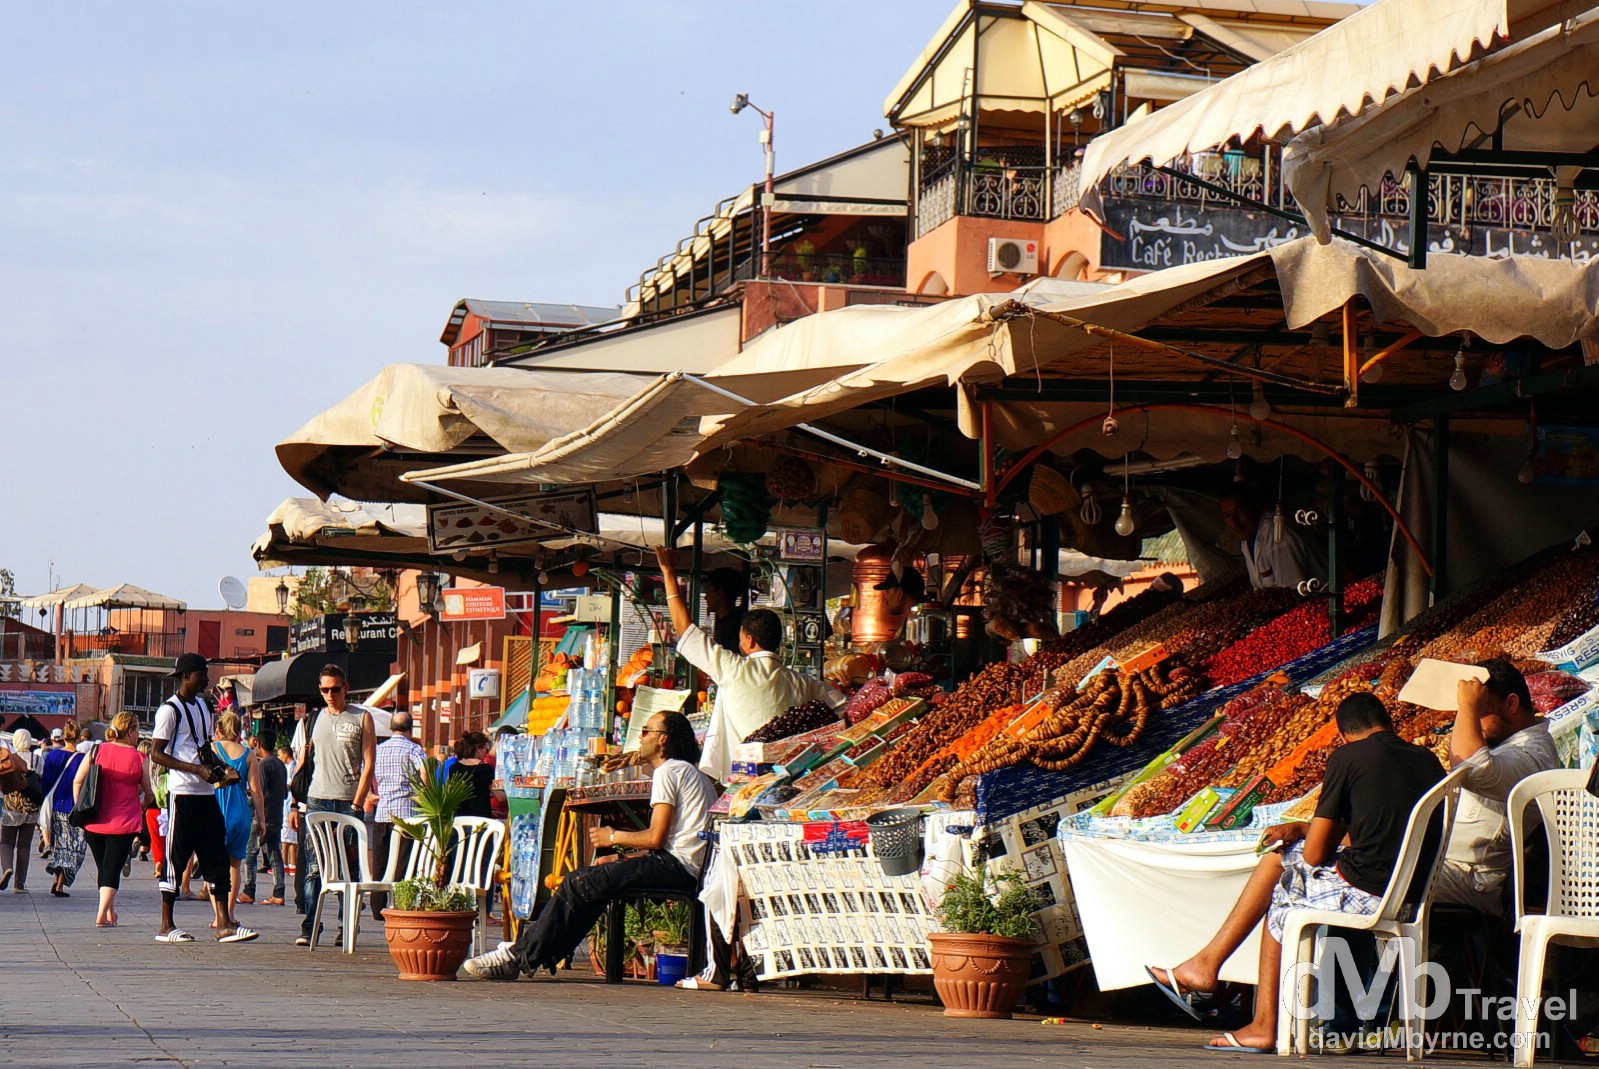 Stalls lining a portion of Djemma El-Fna in Marrakesh, Morocco. May 5th, 2014. 